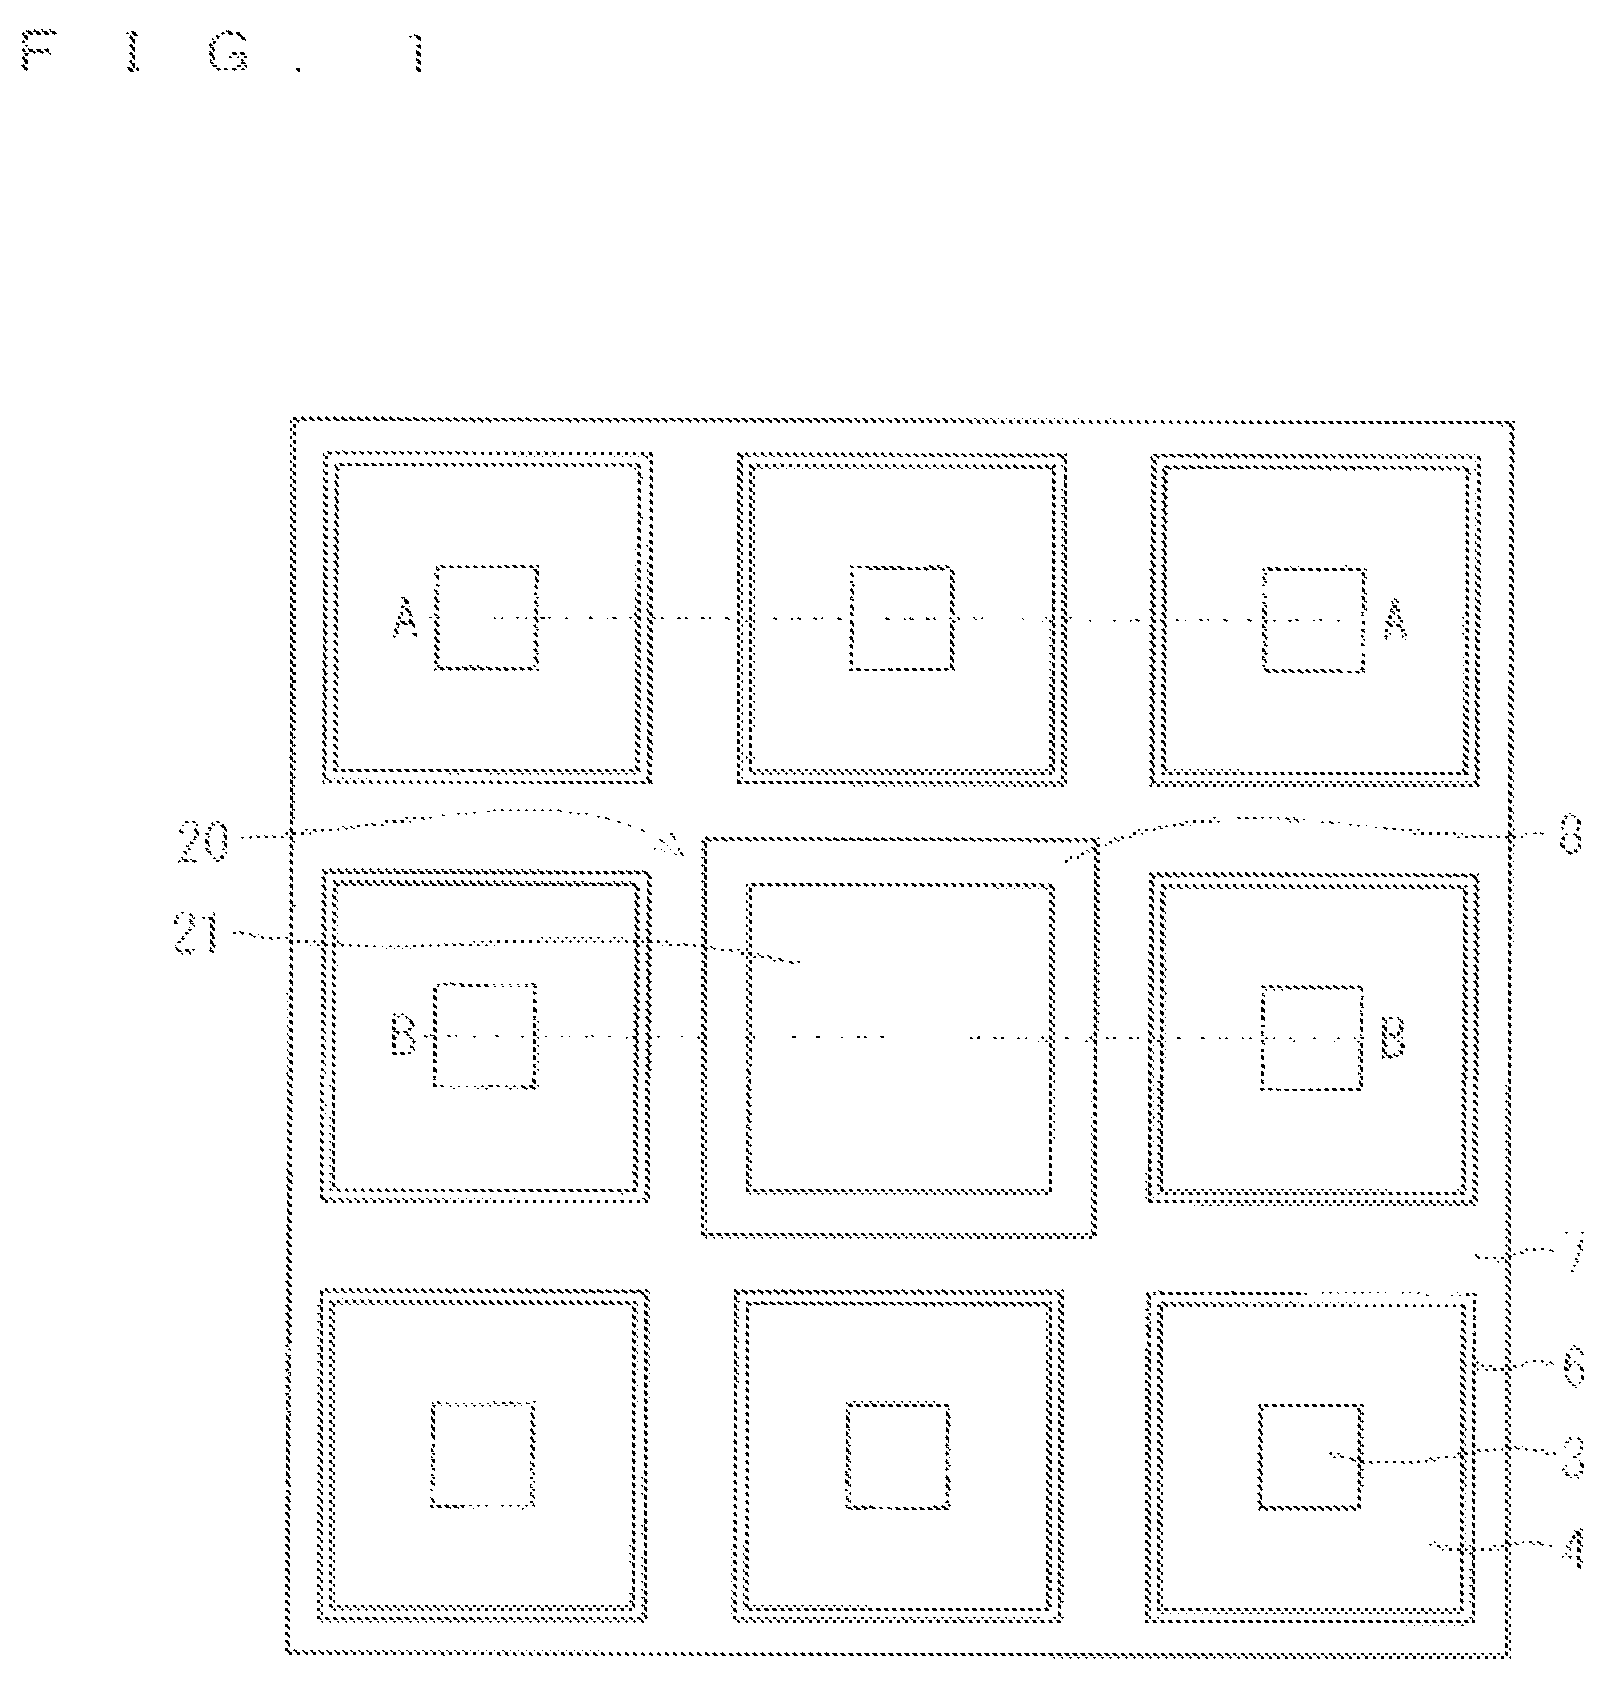 Trench-gate type semiconductor device and manufacturing method therefor